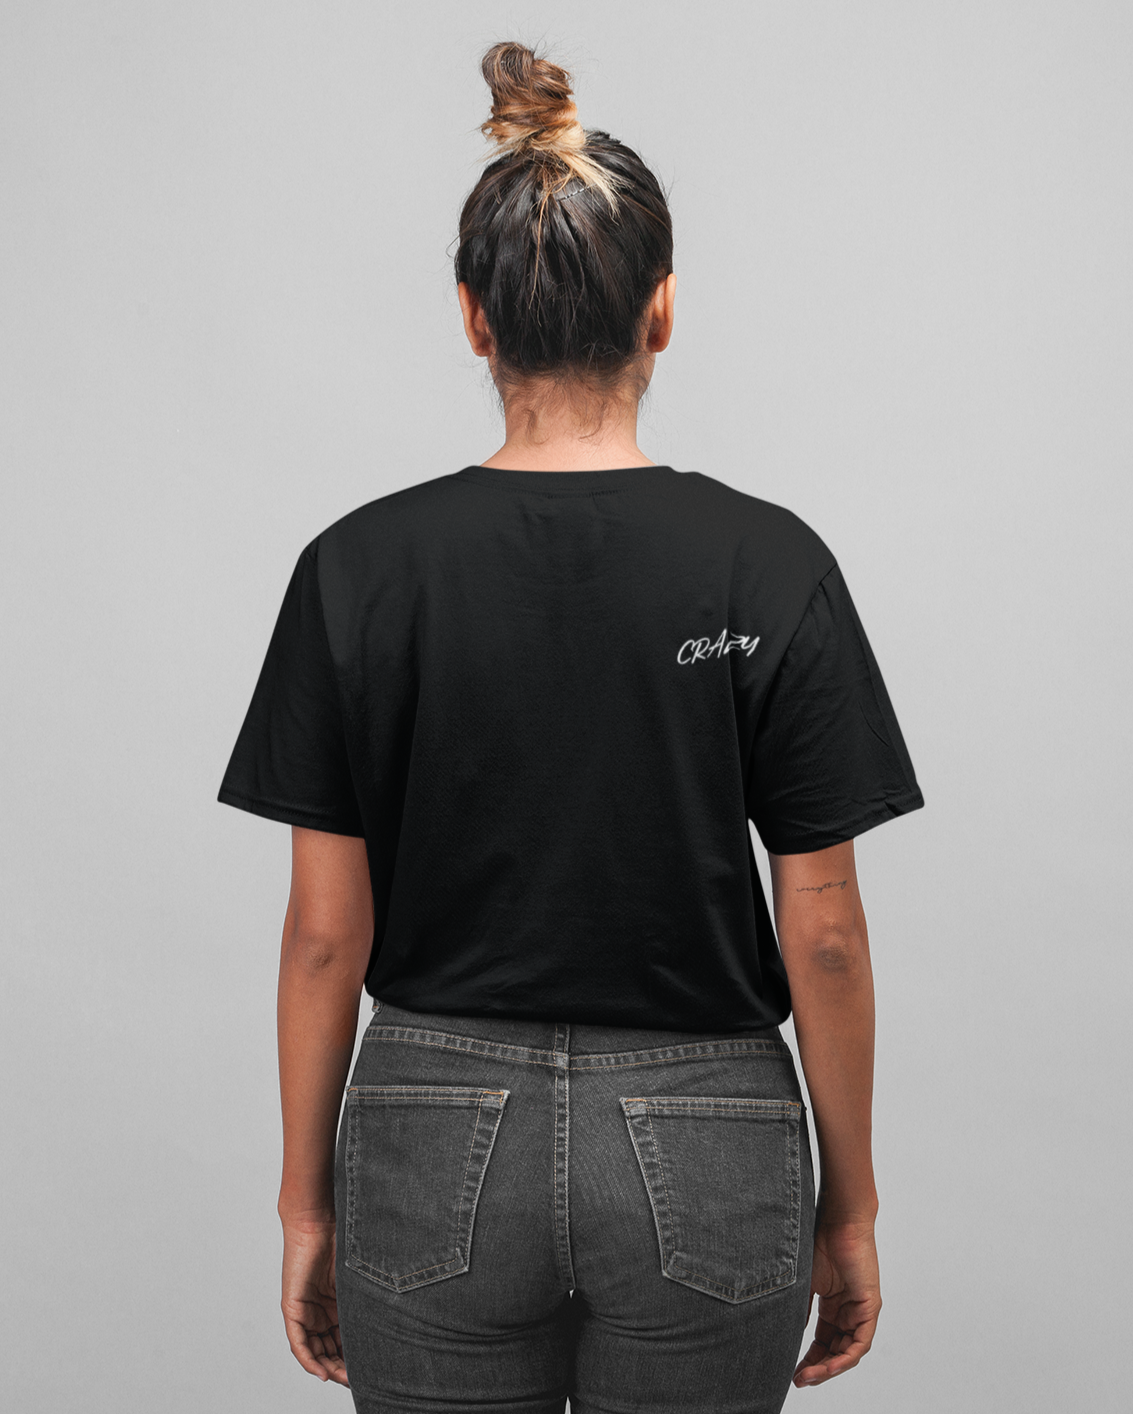 Oversized CSG-T-SHIRT "SAY MY NAME" voor dames